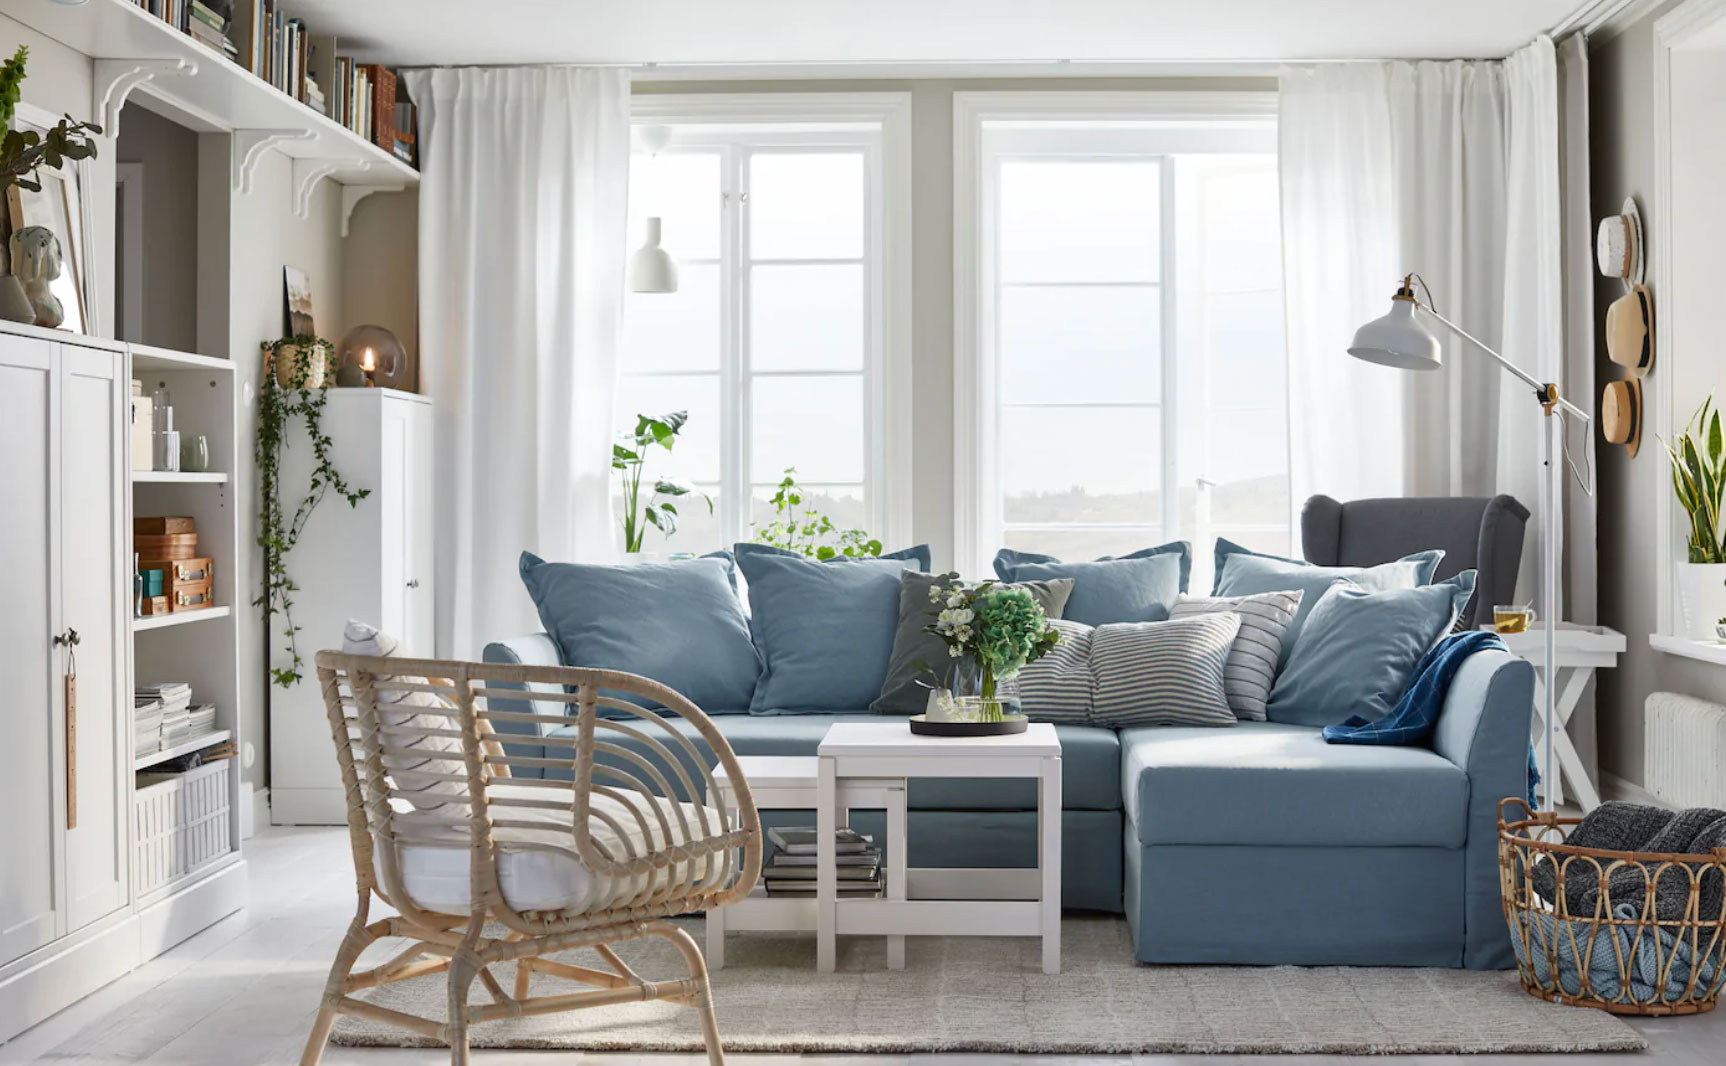 A grey living room with blue L-shaped upholstered sofa, rattan chair and white wall lamp.